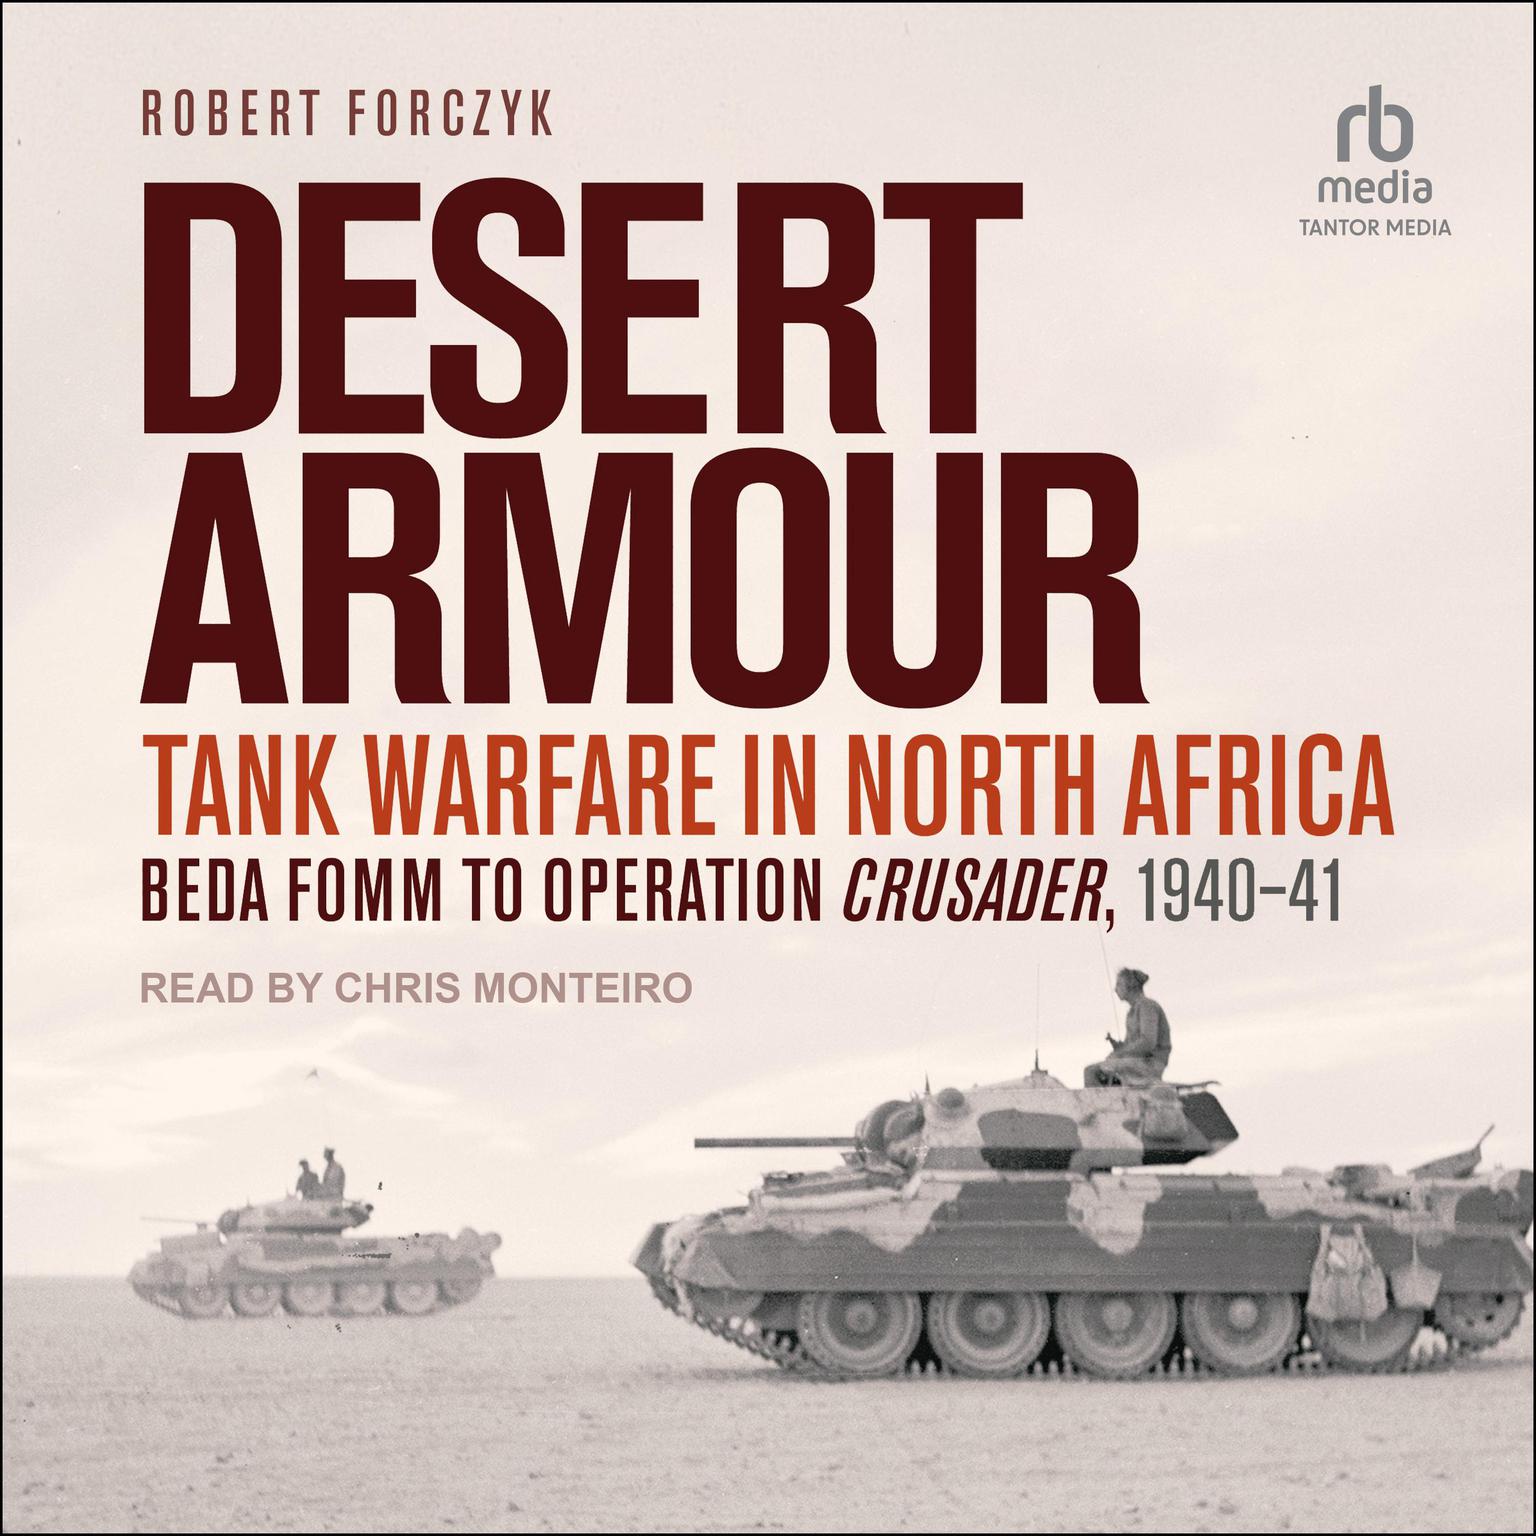 Desert Armour: Tank Warfare in North Africa: Beda Fomm to Operation Crusader, 1940-41 Audiobook, by Robert Forczyk